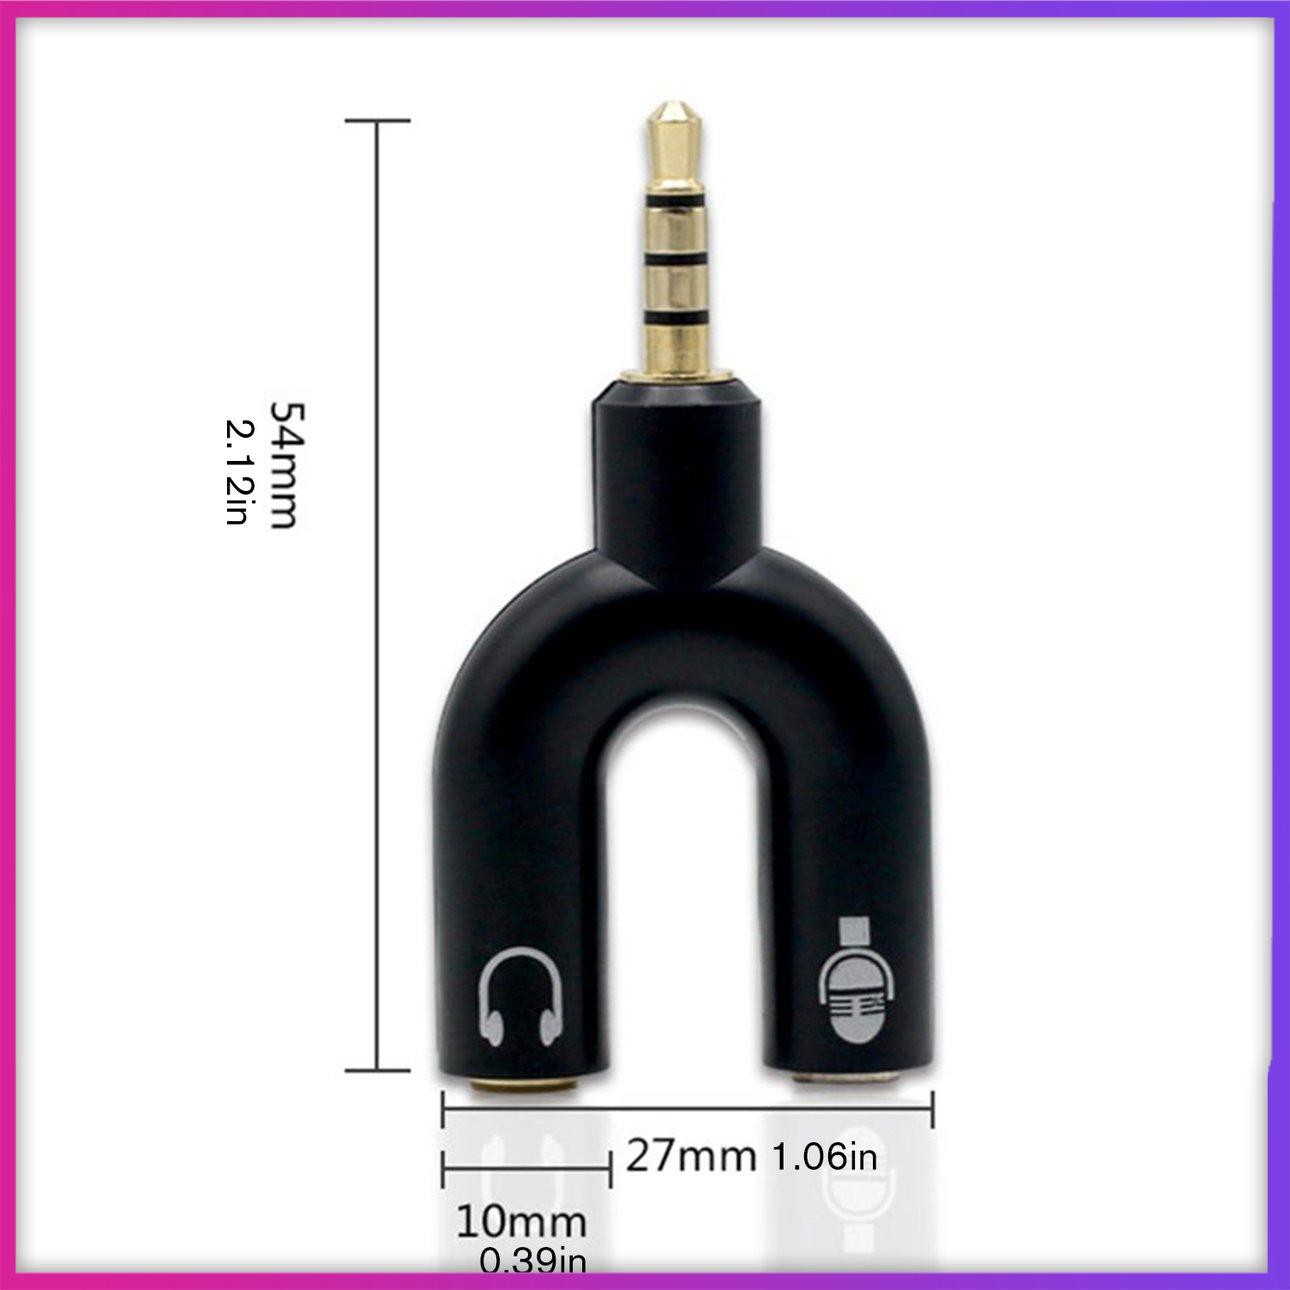 3.5mm Y splitter divides wheat male to double female jack audio headset microphone adapter converter laptop mobile phone black